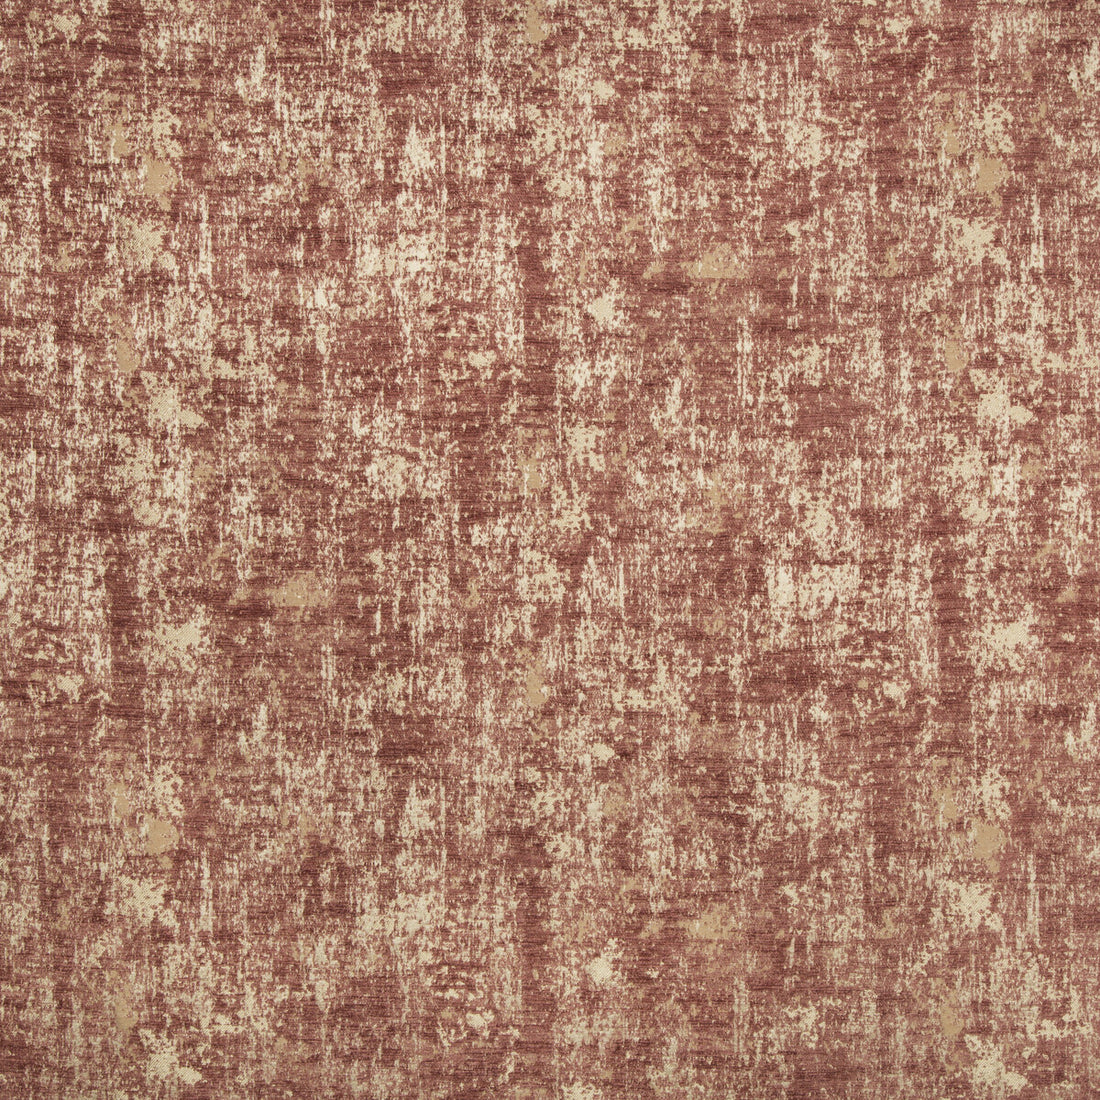 Les Ecorces Woven fabric in petal color - pattern 8017130.119.0 - by Brunschwig &amp; Fils in the Les Ensembliers collection